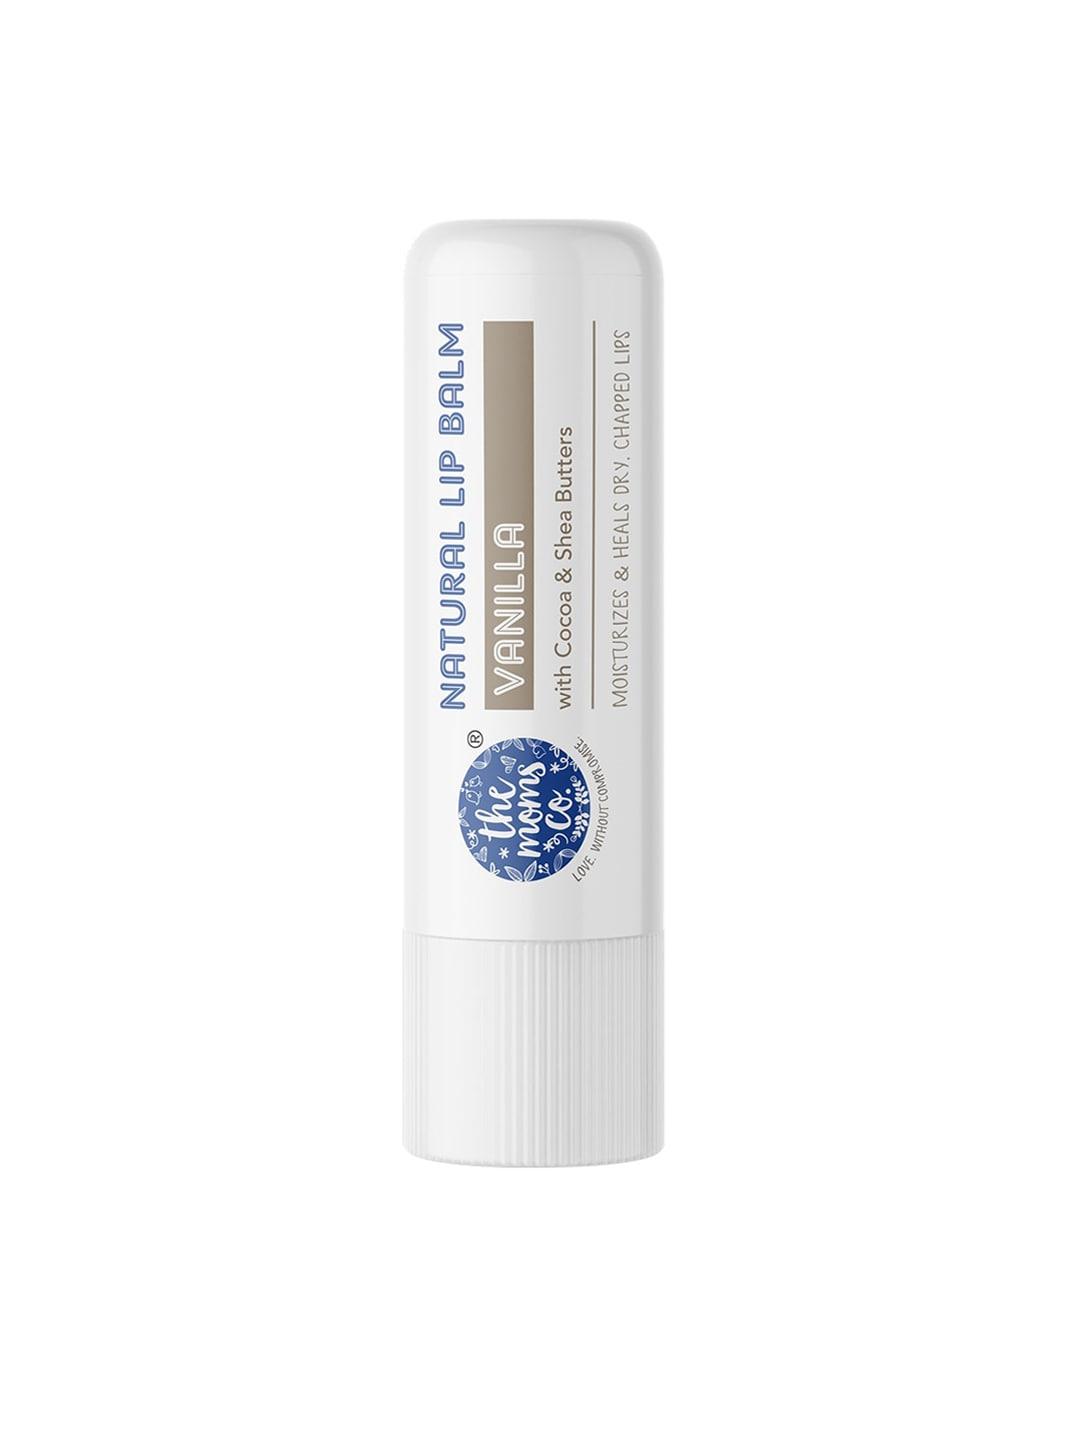 The Moms Co. Natural Vanilla Lip Balm with Vit E & Natural Extracts - 5 g